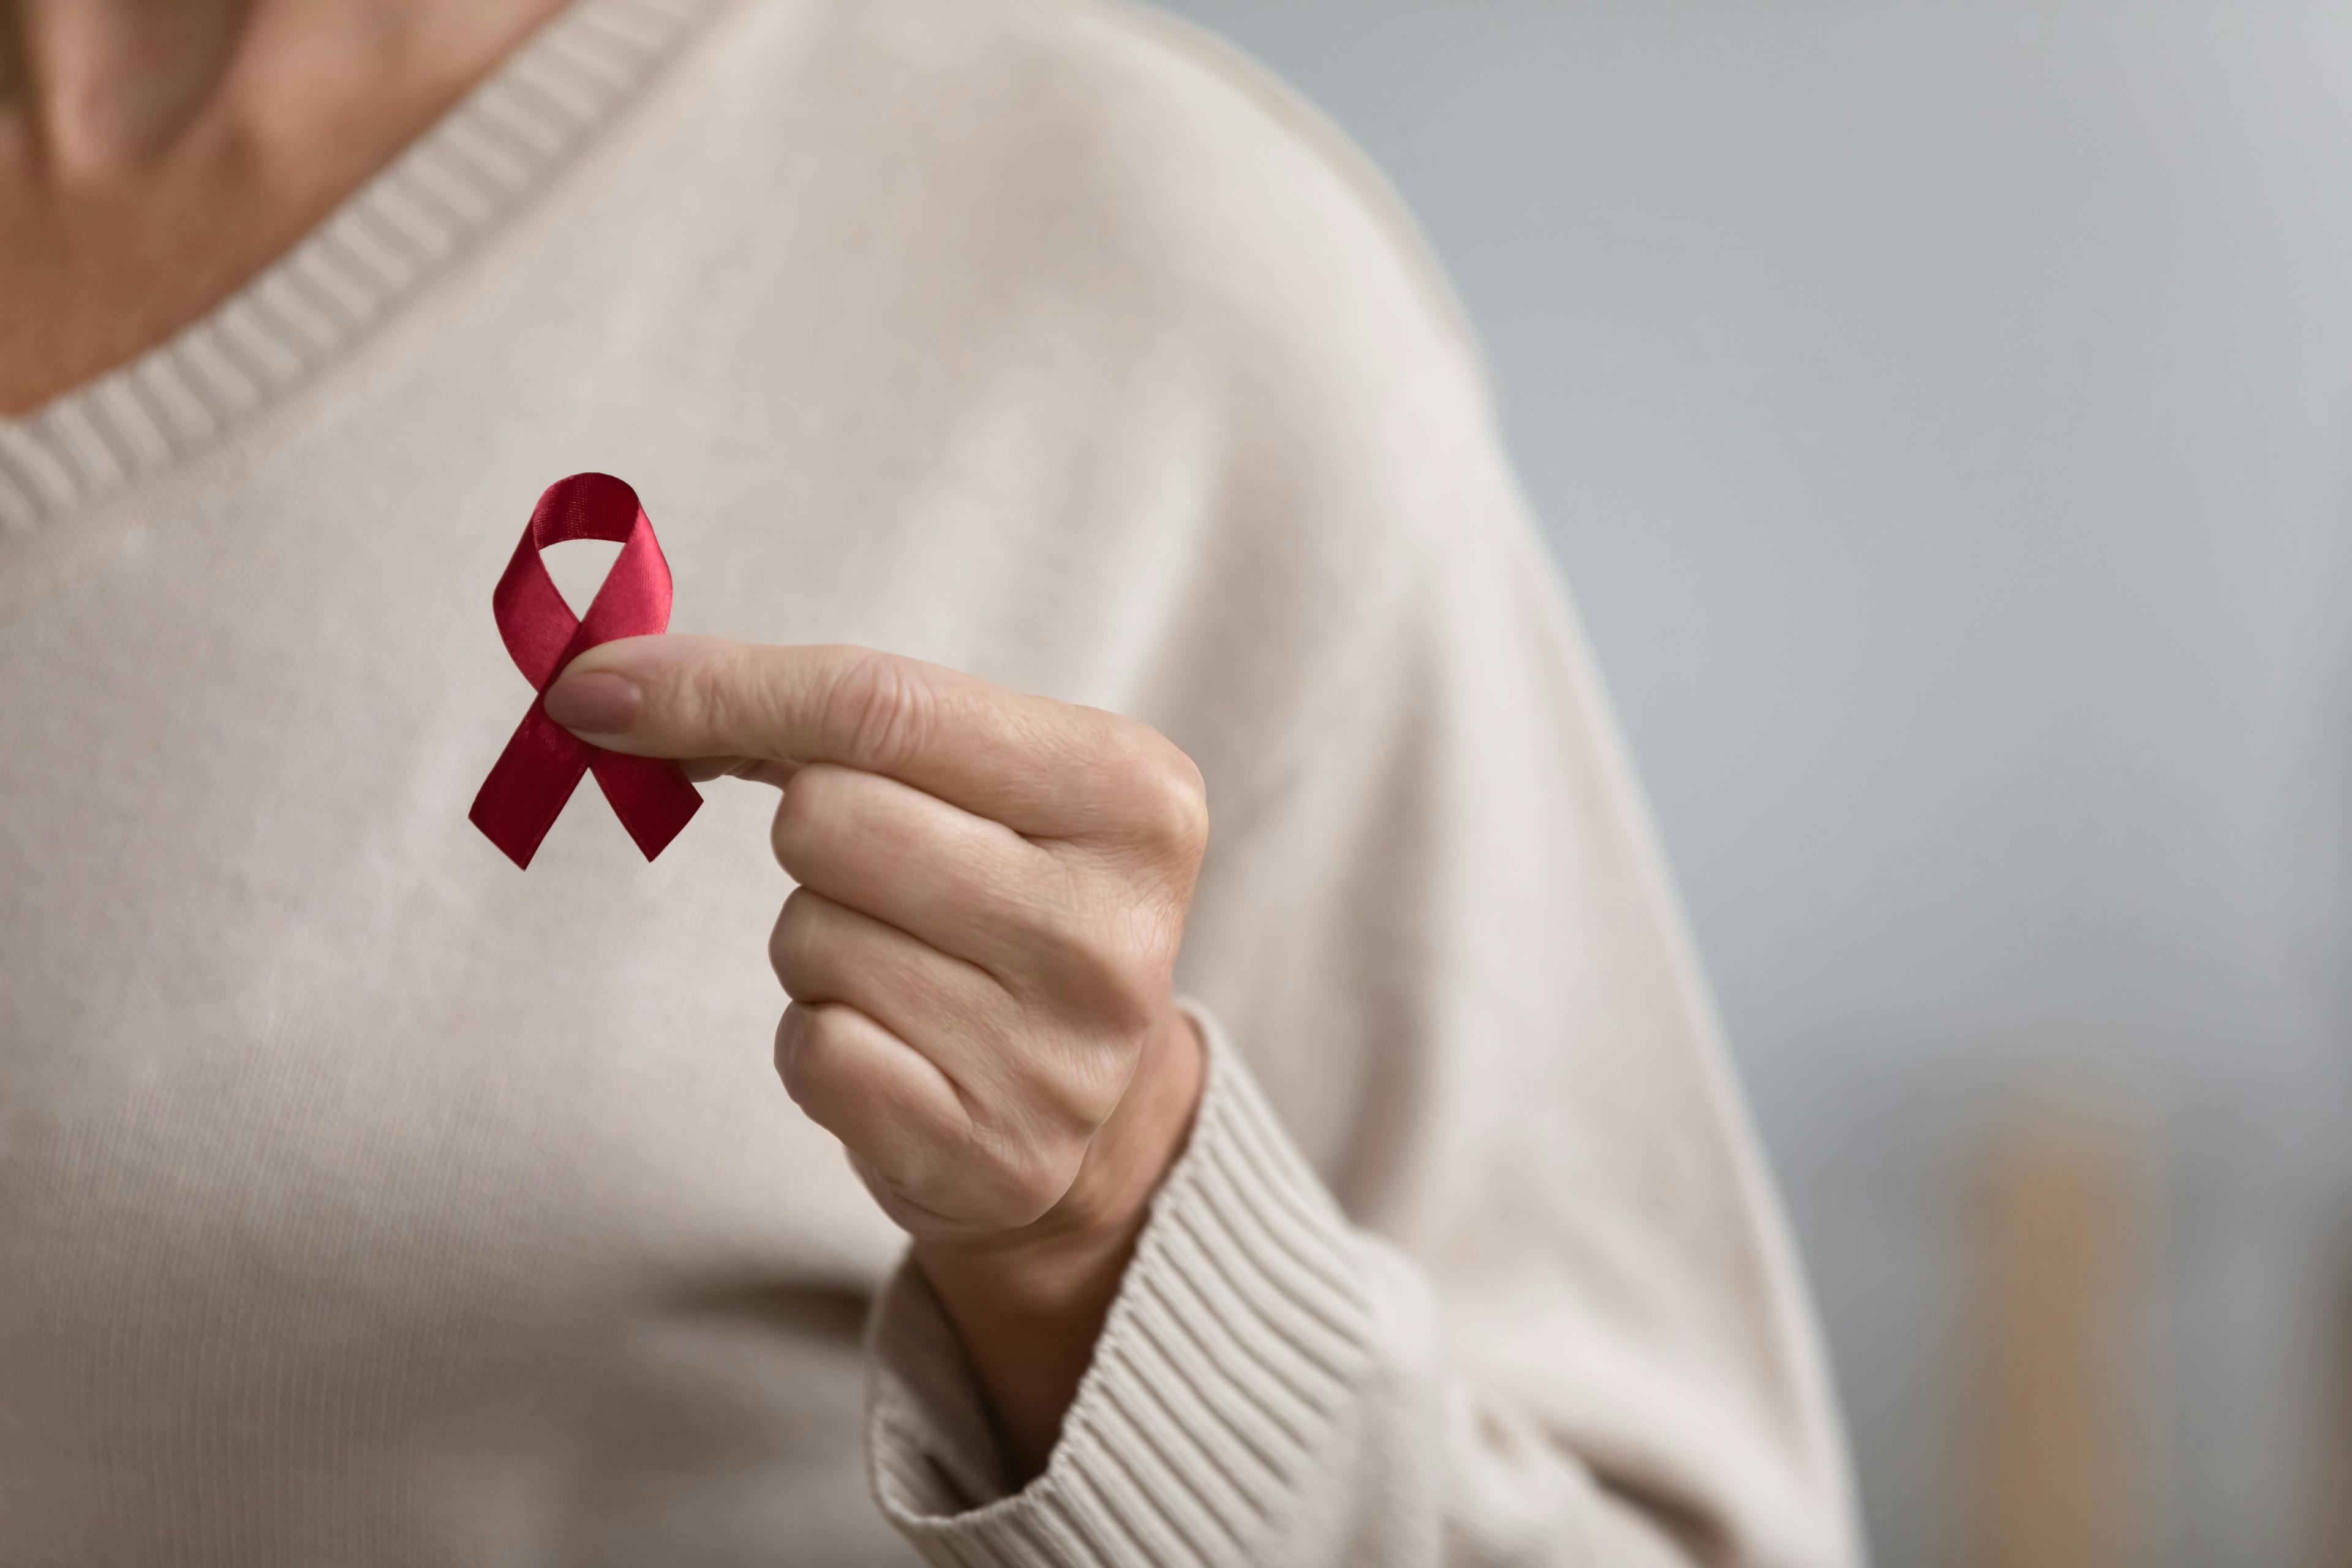 Burden of Aging-Related Comorbidities Higher in Women, Those with HIV